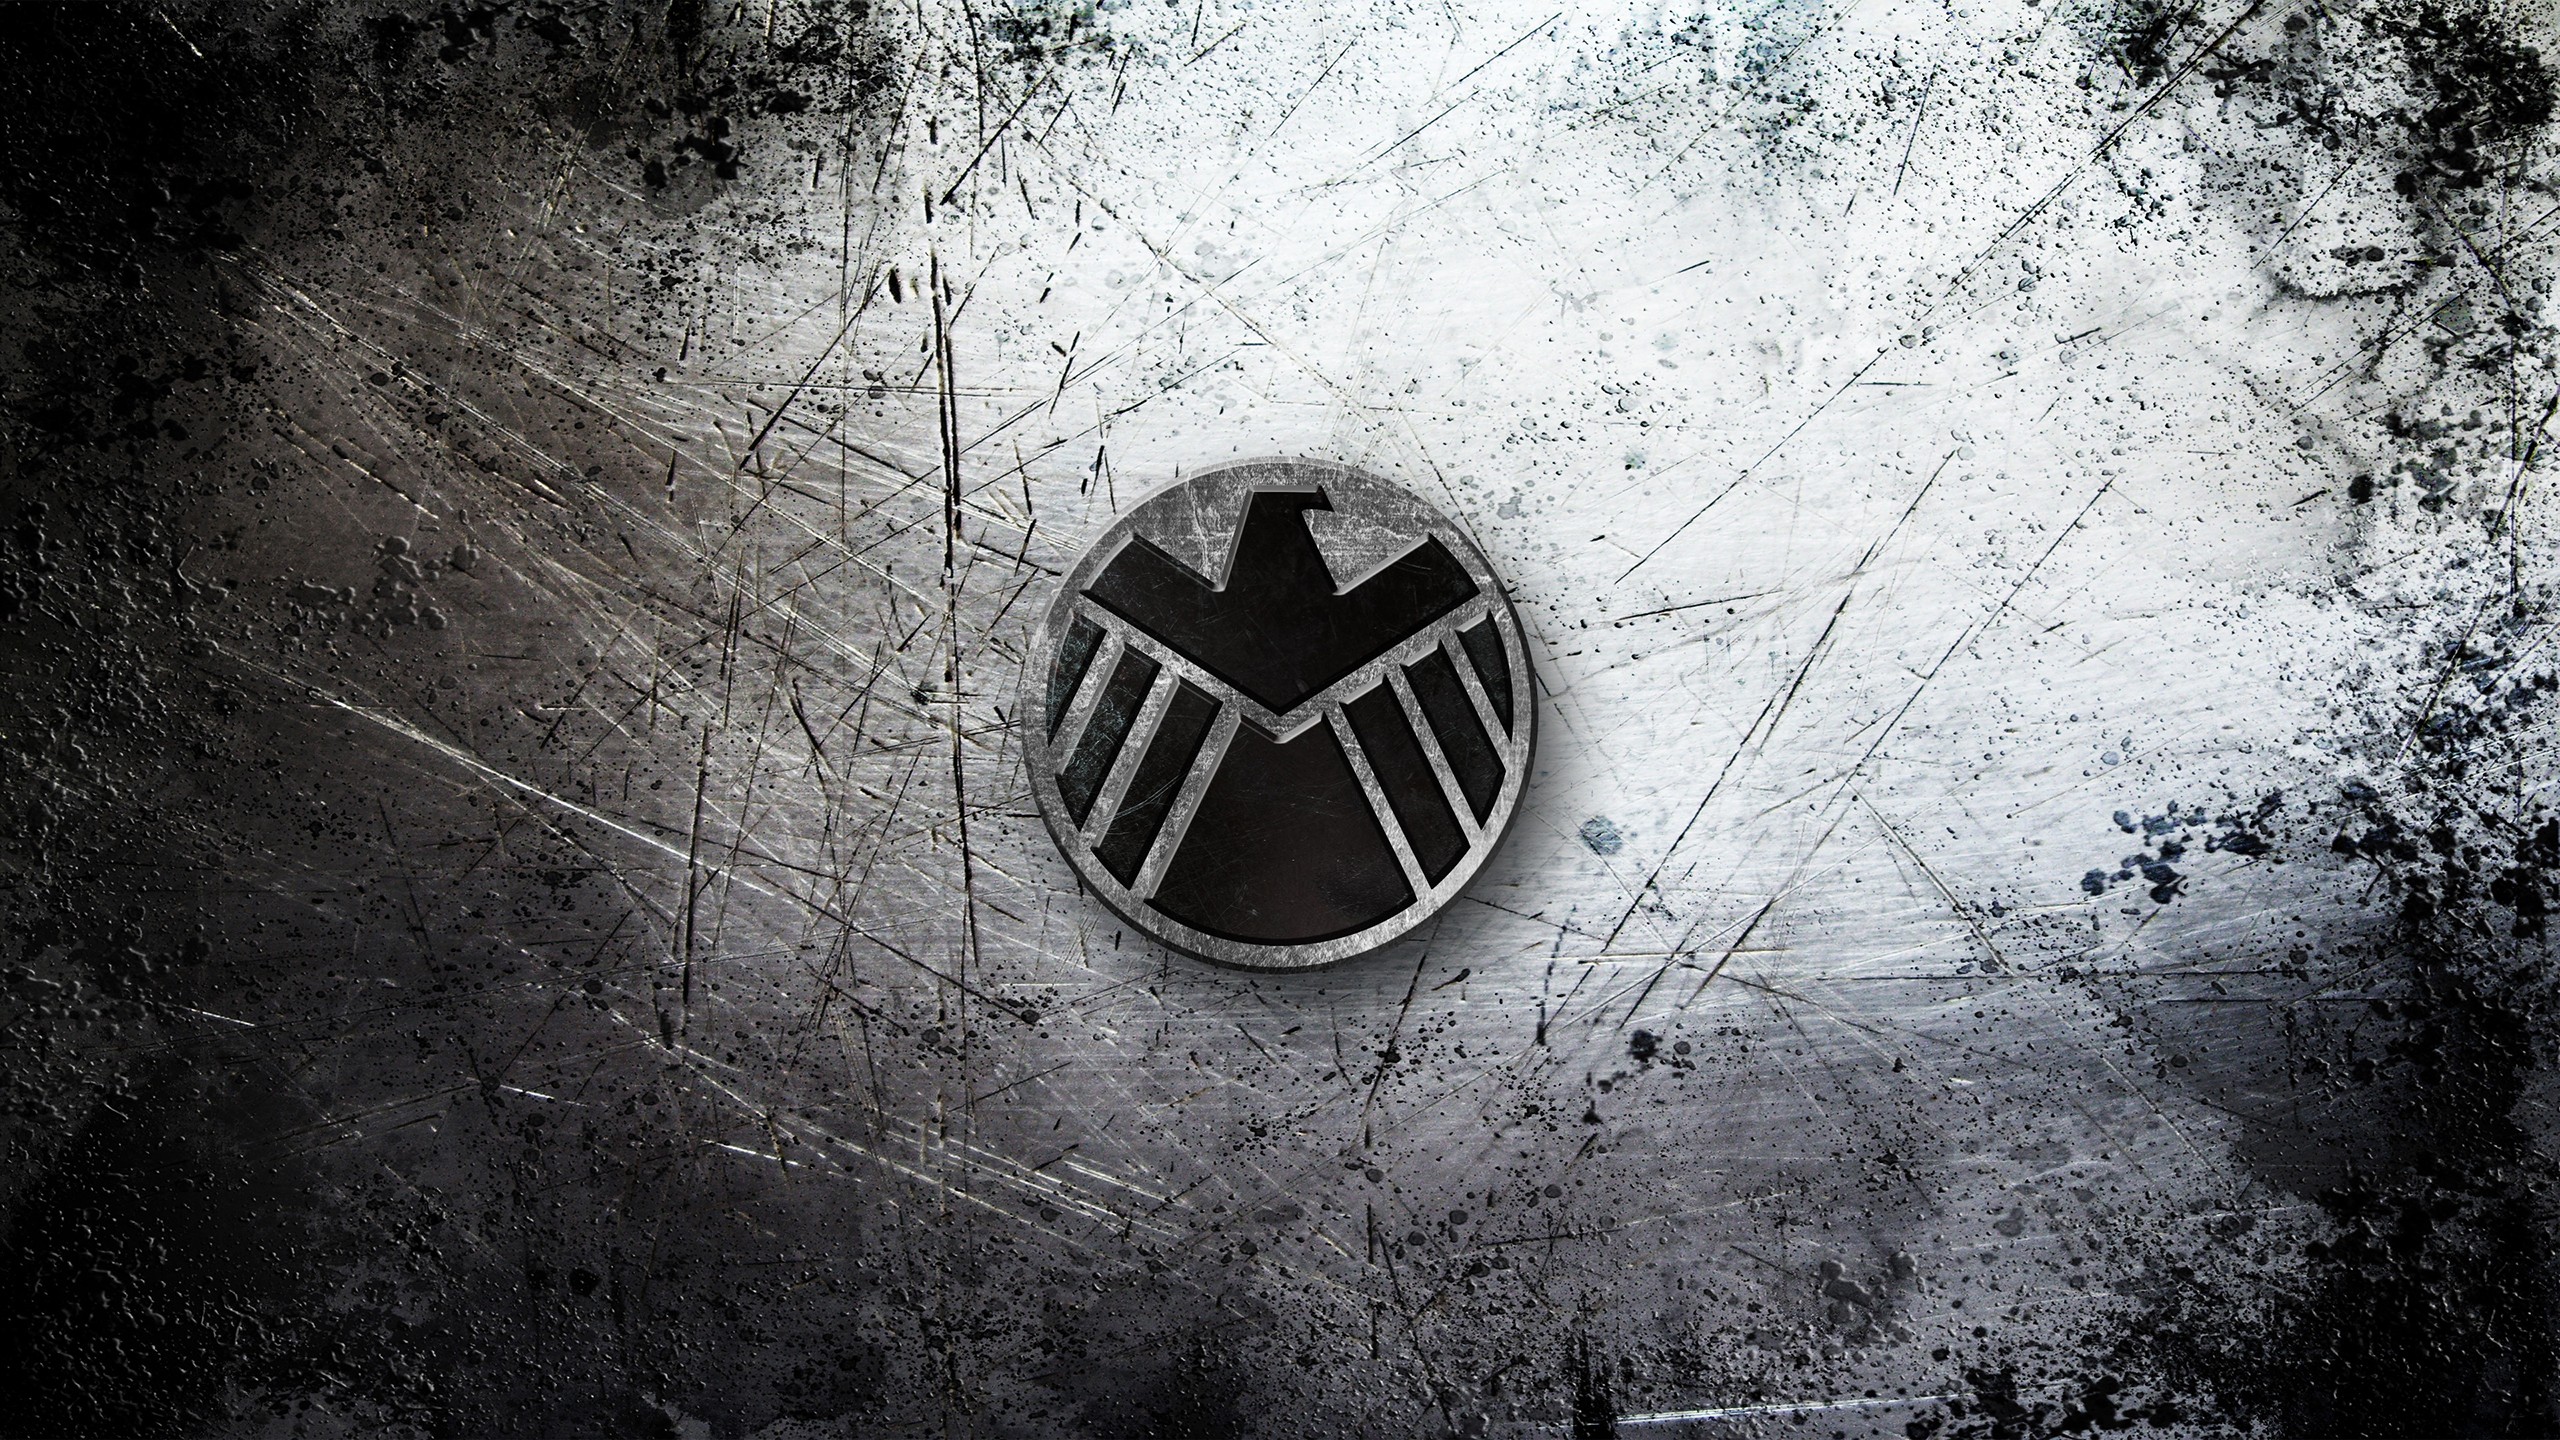 Wallpaper, logo, Marvel Comics, circle, The Avengers, shape, darkness, number, computer wallpaper, black and white, monochrome photography 2560x1440